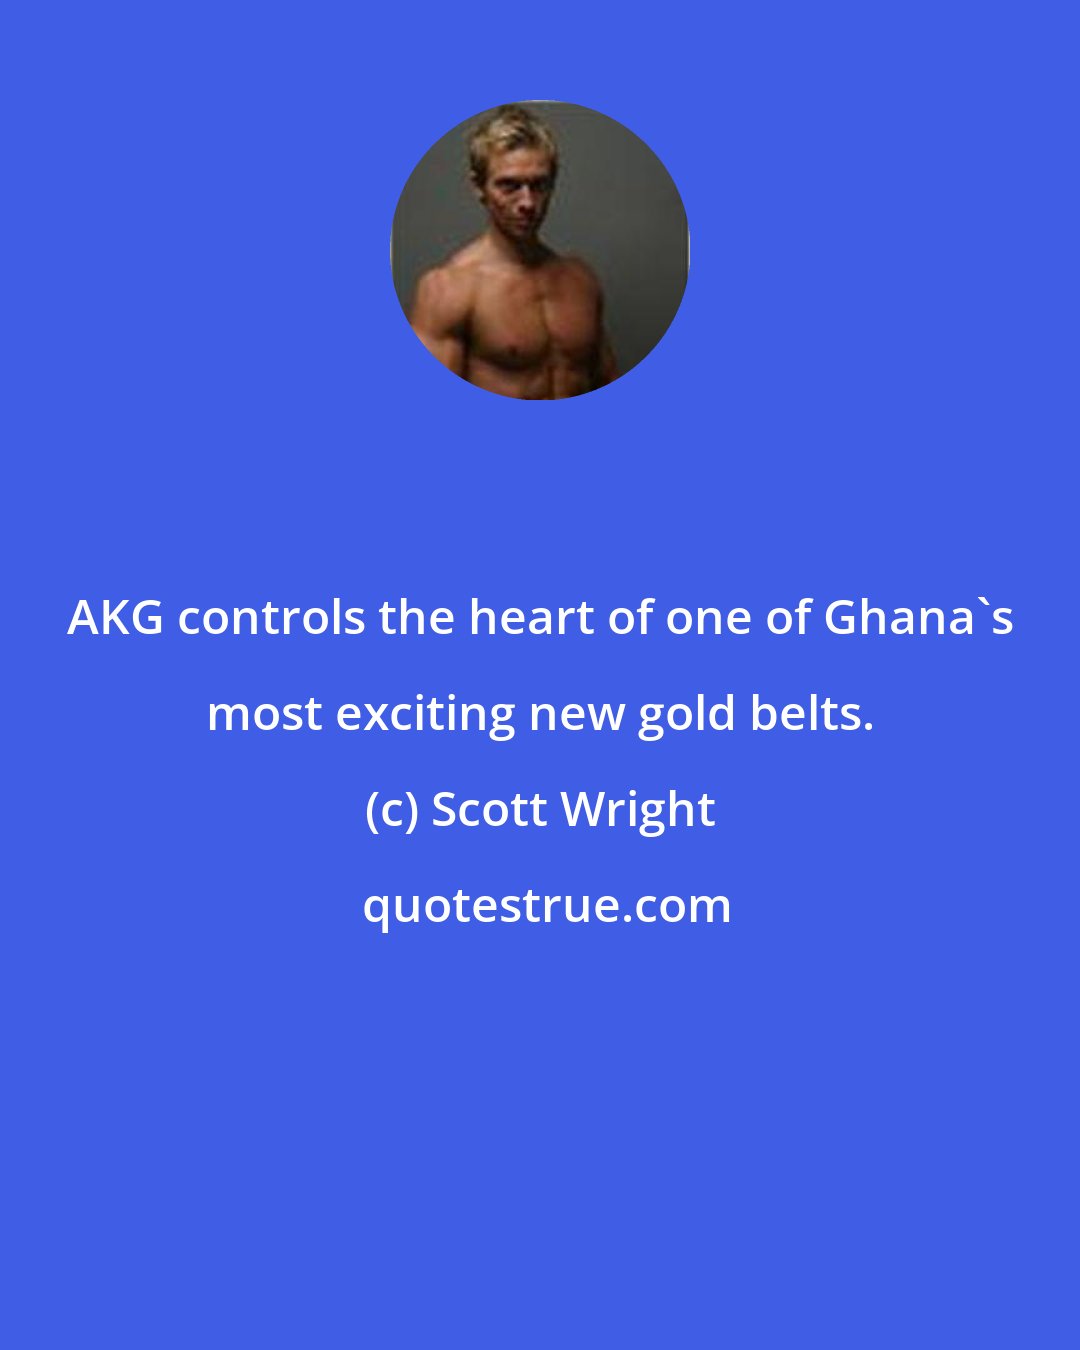 Scott Wright: AKG controls the heart of one of Ghana's most exciting new gold belts.